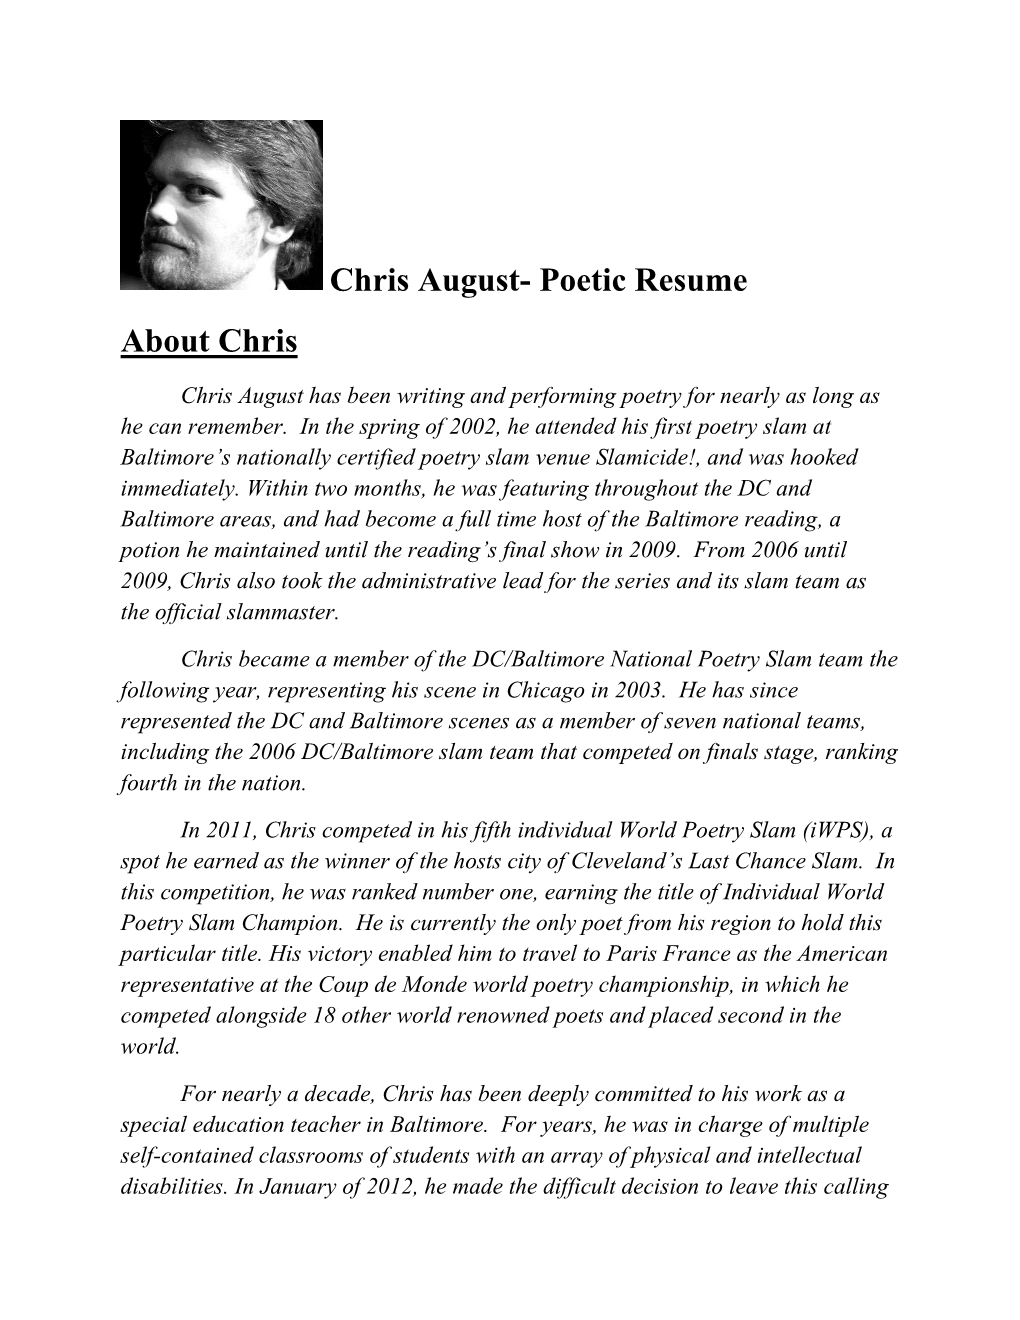 Chris August- Poetic Resume About Chris